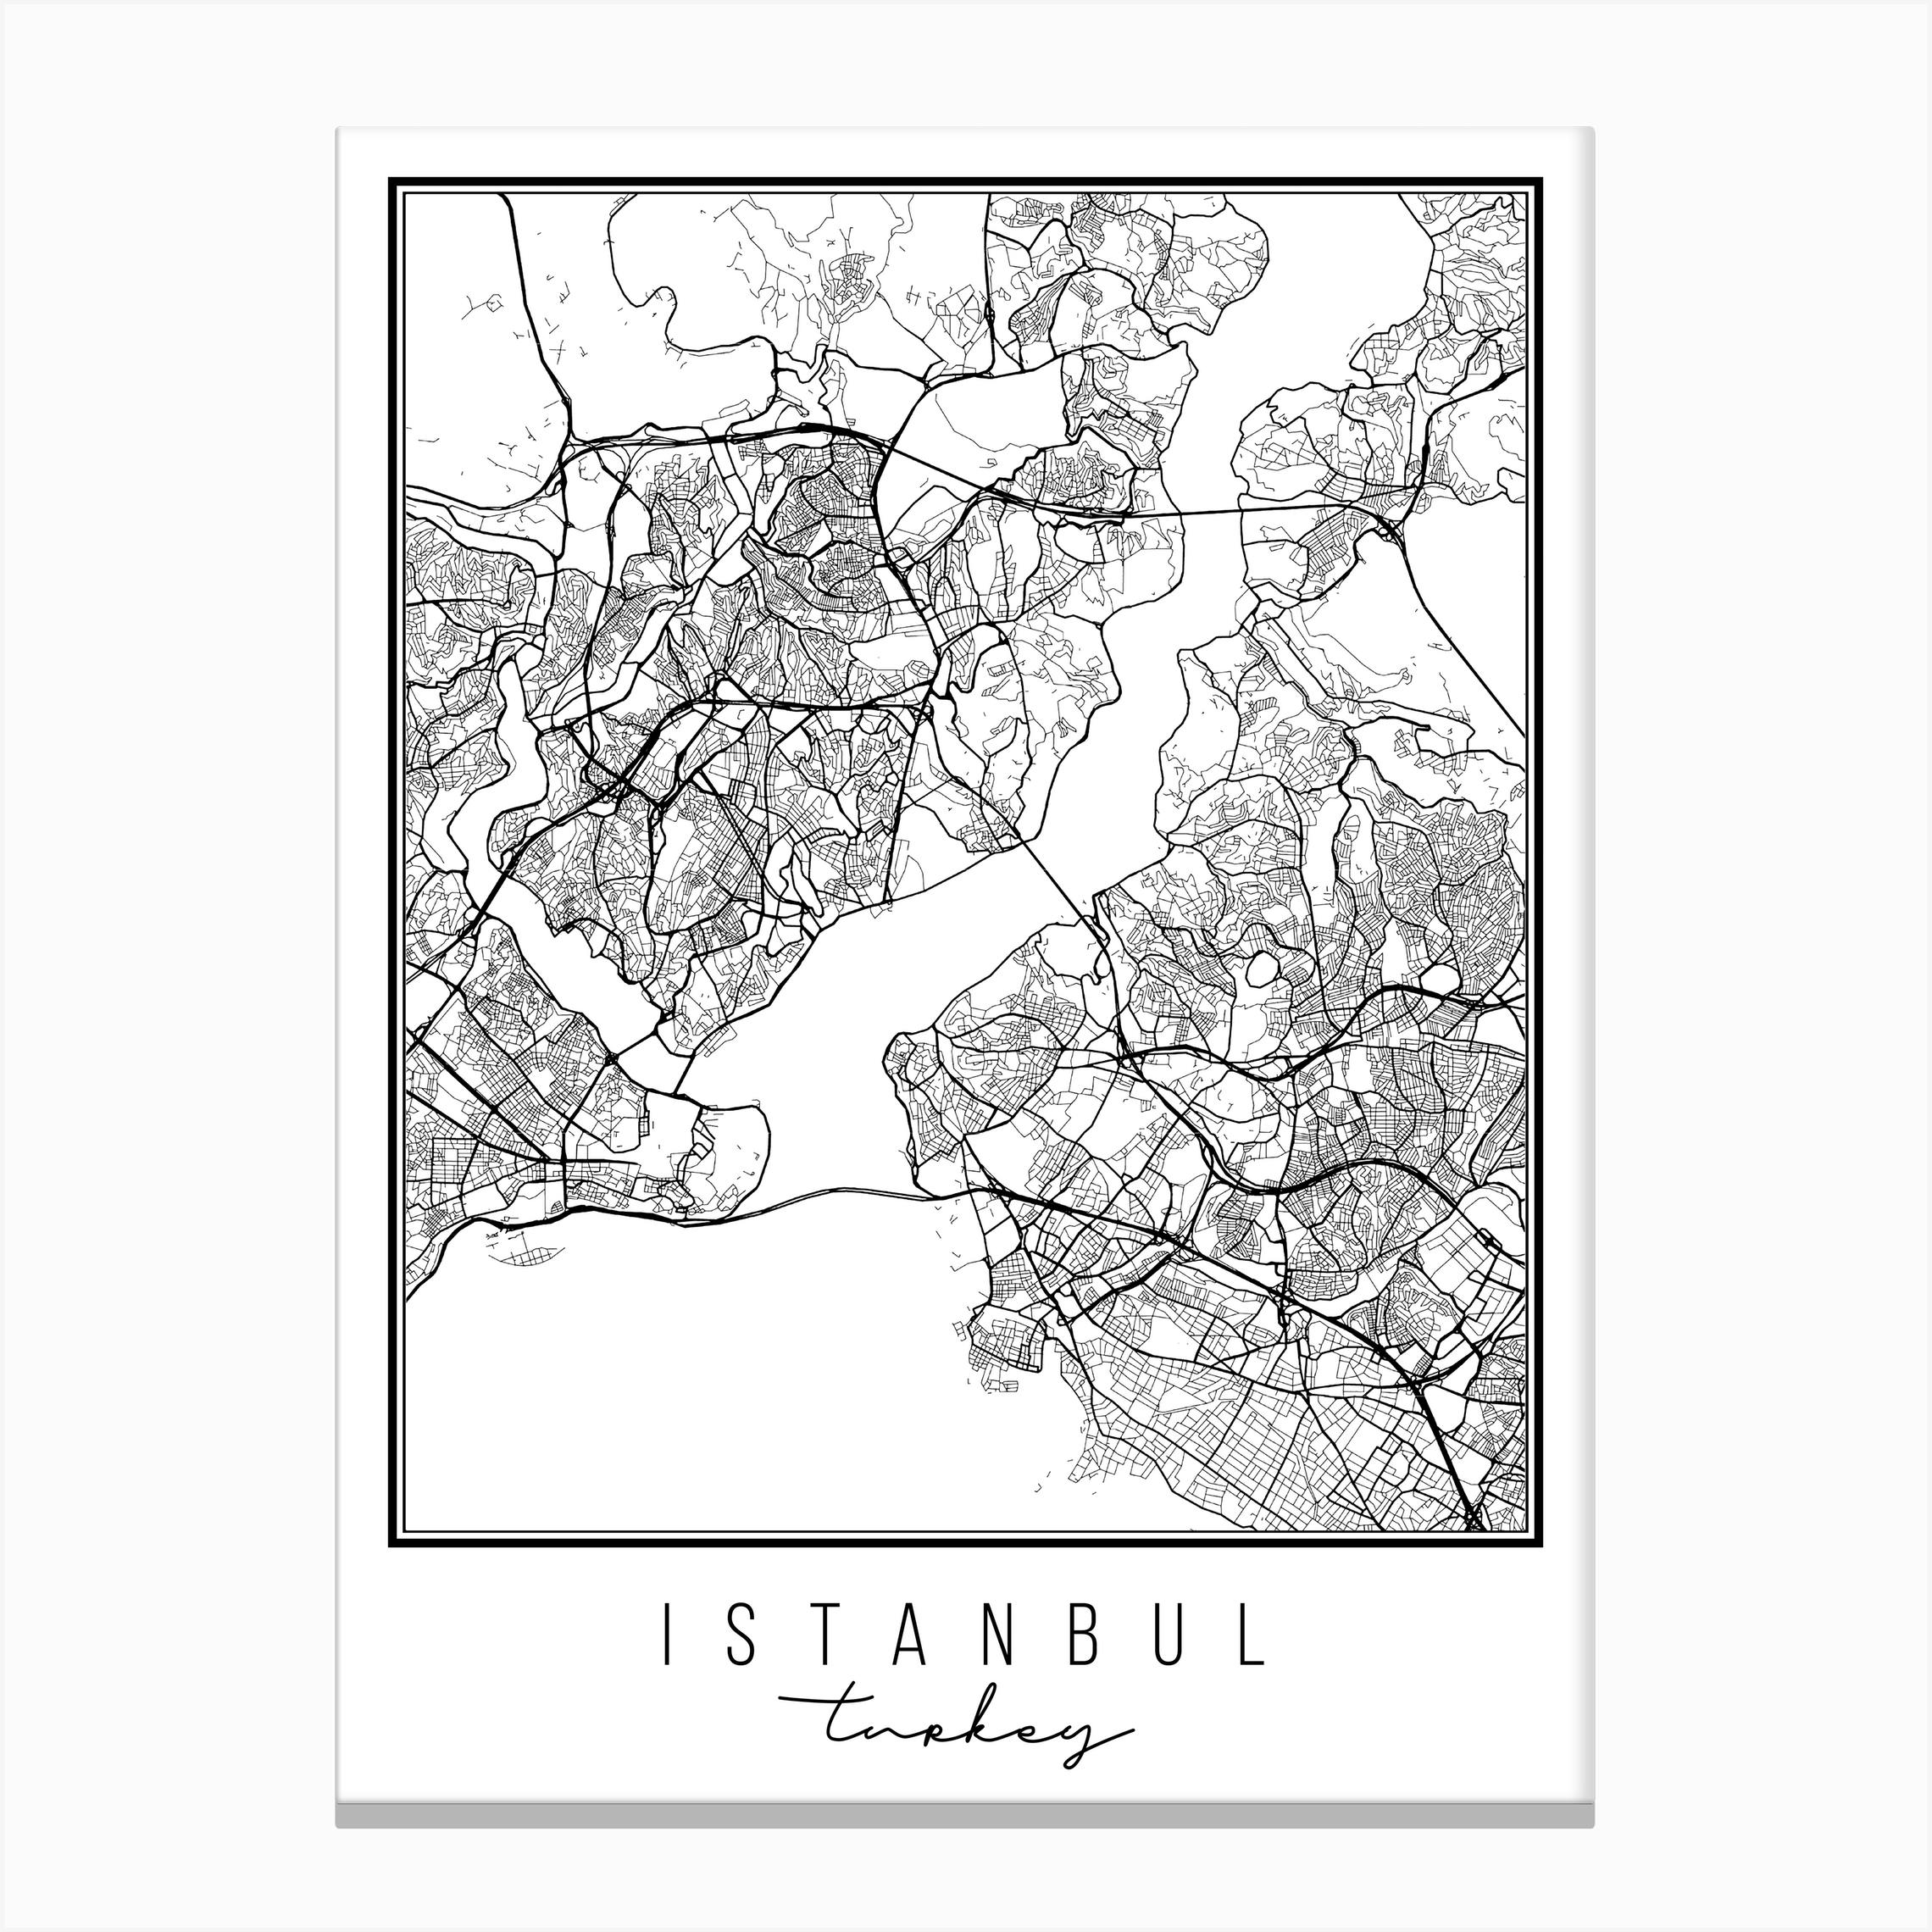 Turkey　Co　Map　Istanbul　Paper　Print　Typologie　Street　Fy　Canvas　by